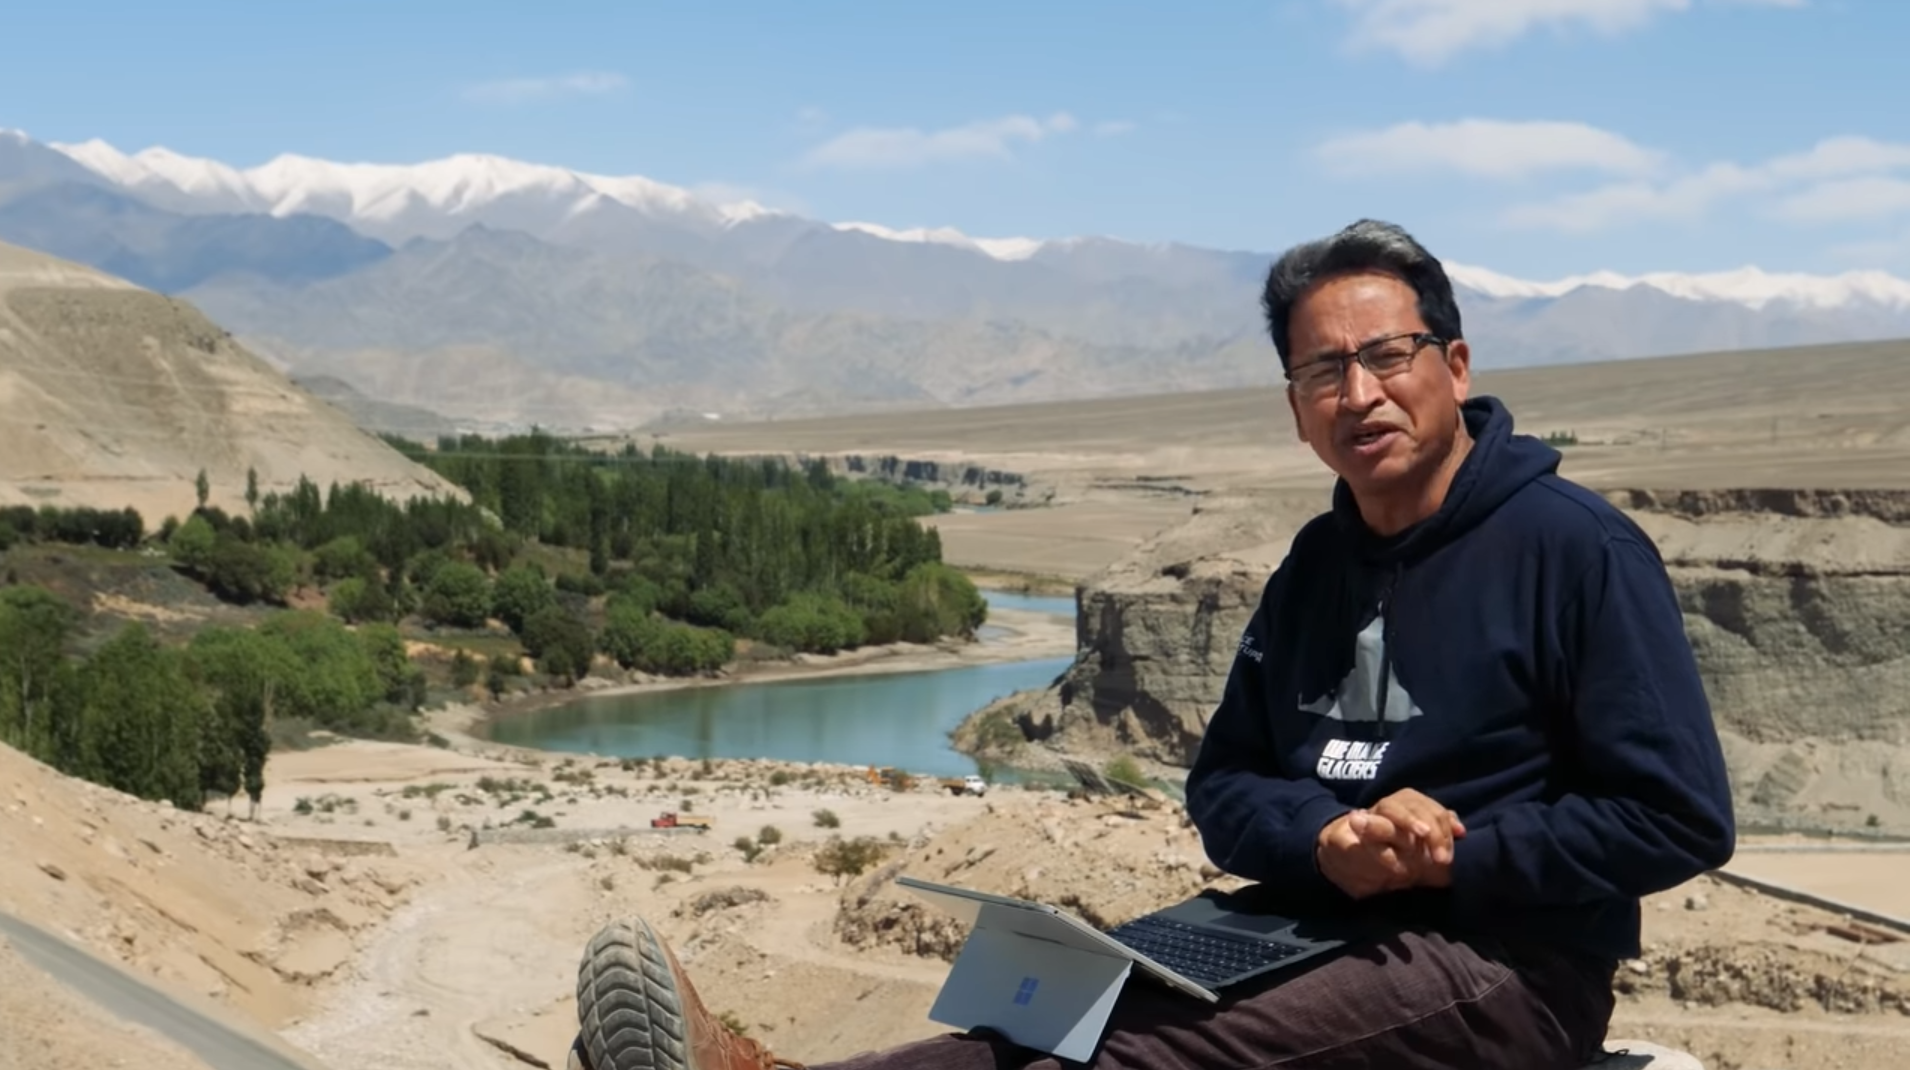 Sonam Wangchuk appeals to all Indian citizens